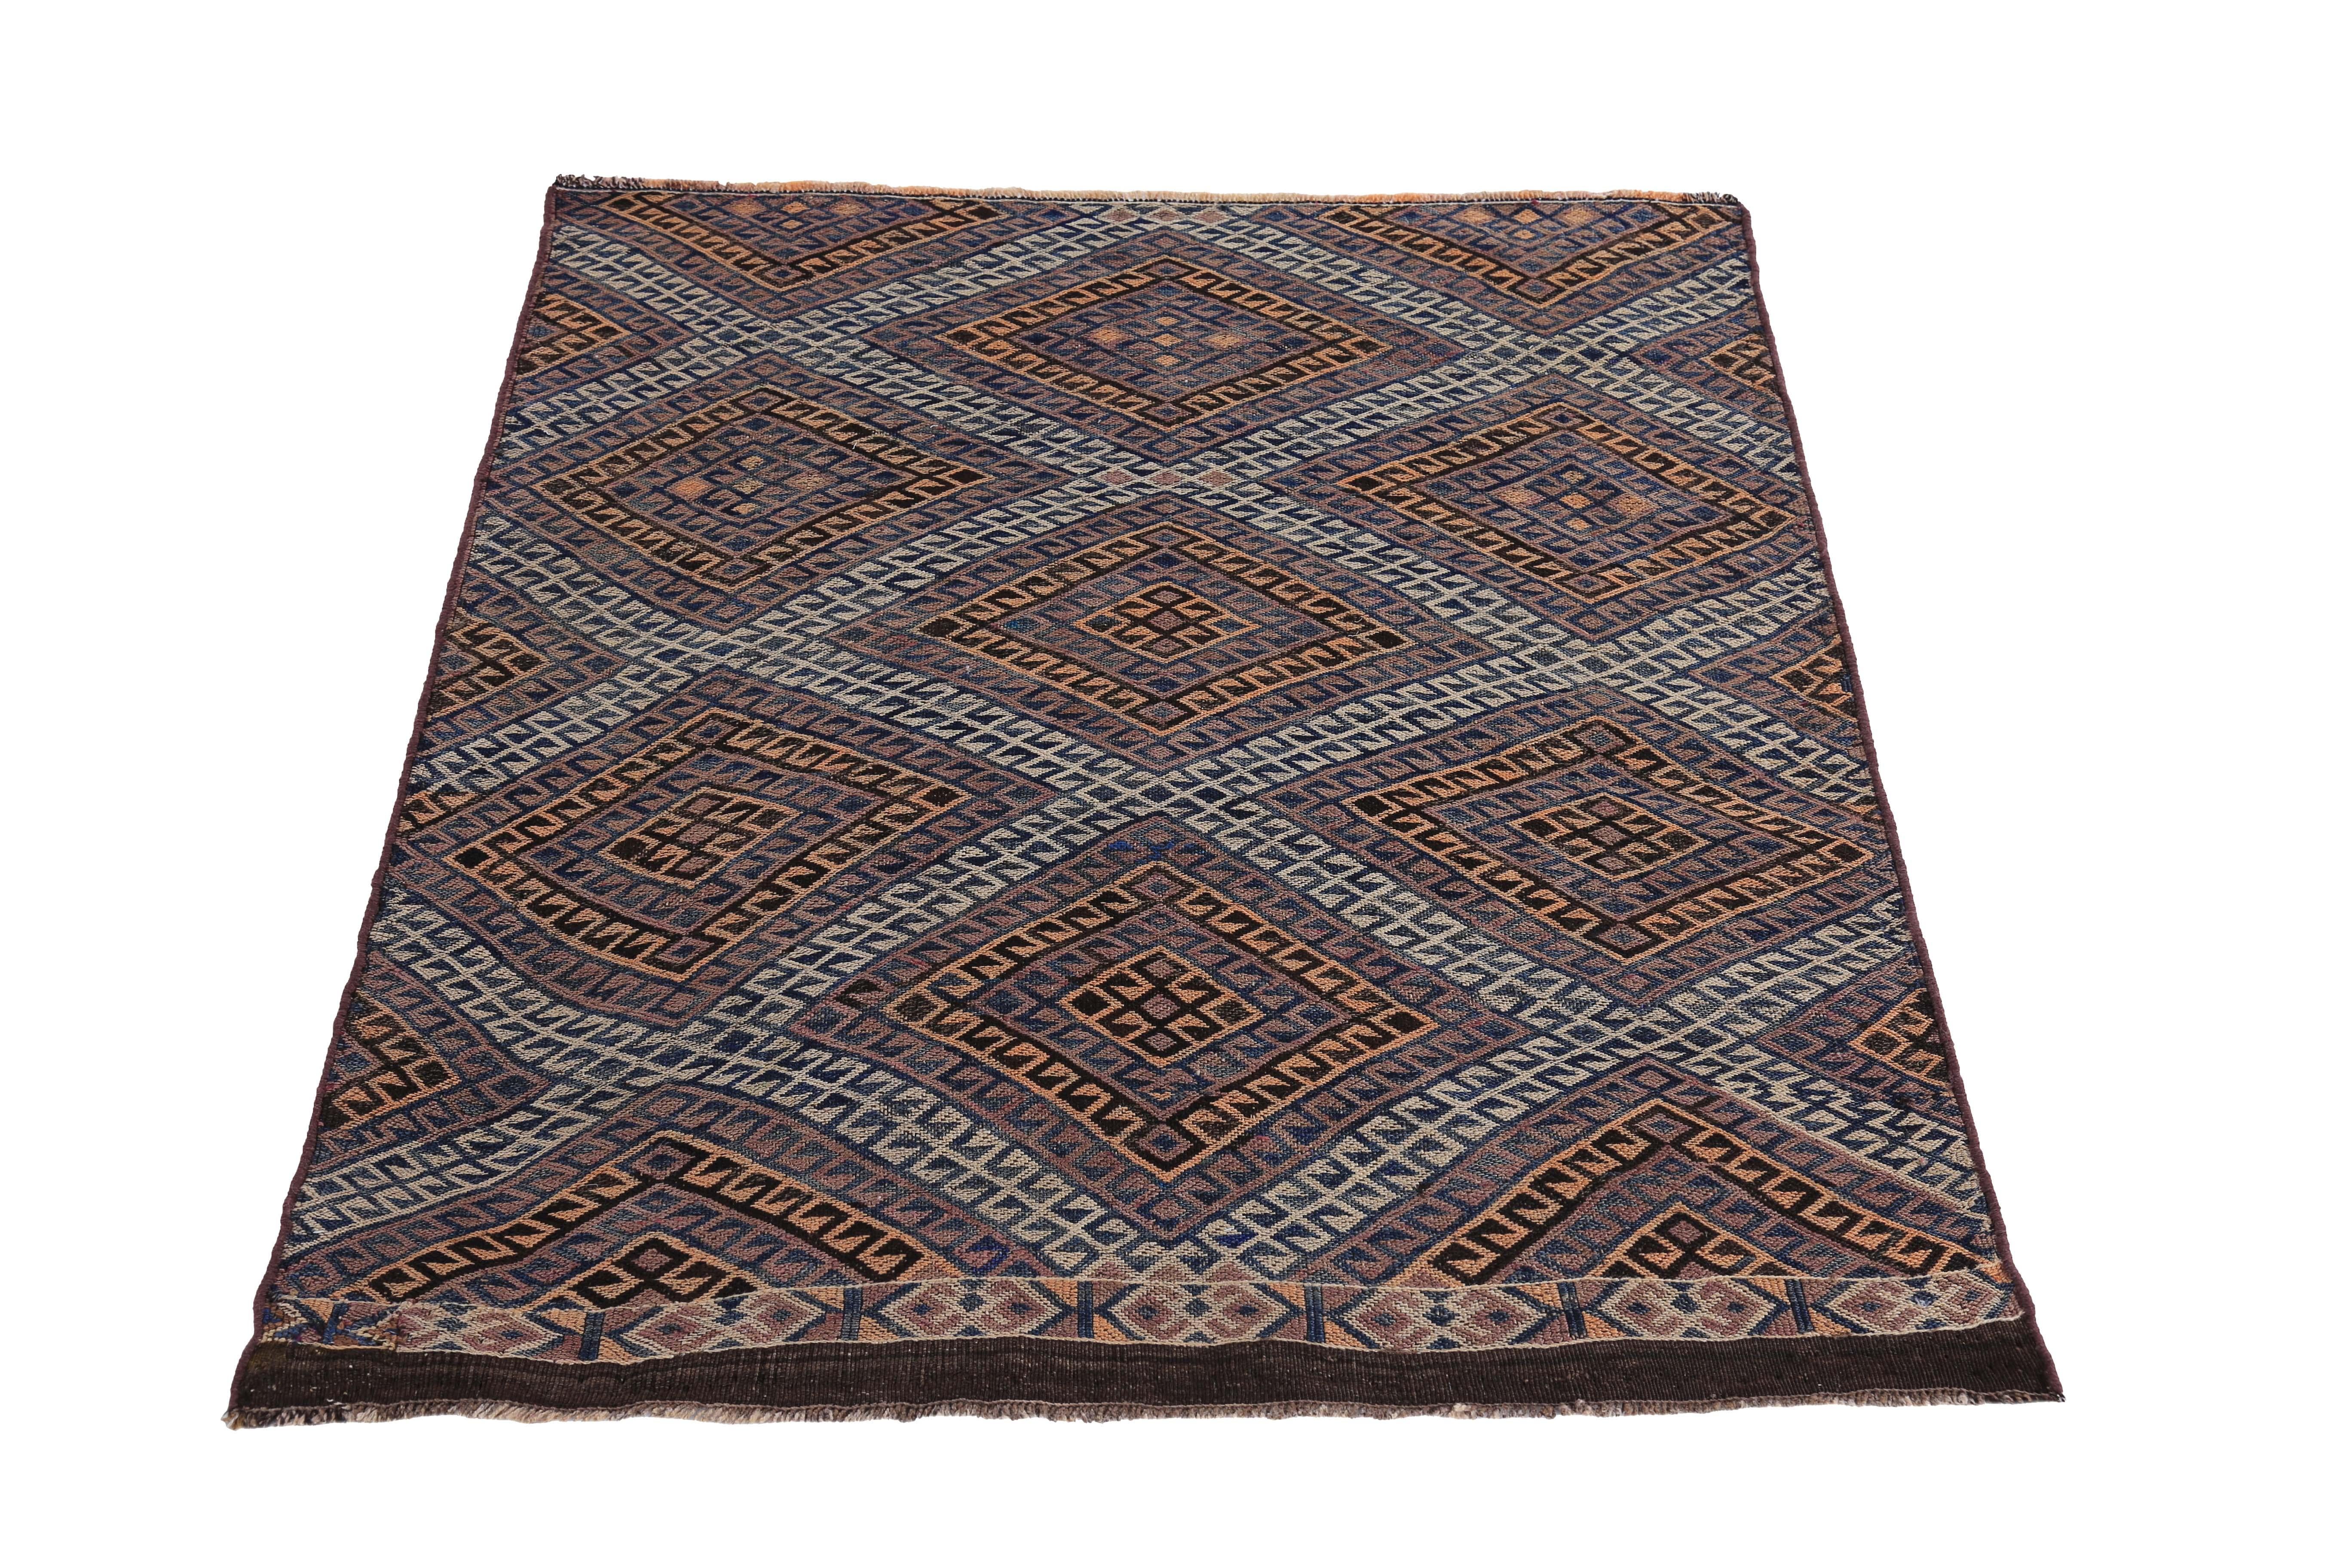 Turkish rug handwoven from the finest sheep’s wool and colored with all-natural vegetable dyes that are safe for humans and pets. It’s a traditional Kilim flat-weave design featuring brown, orange and beige diamond design patterns. It’s a stunning